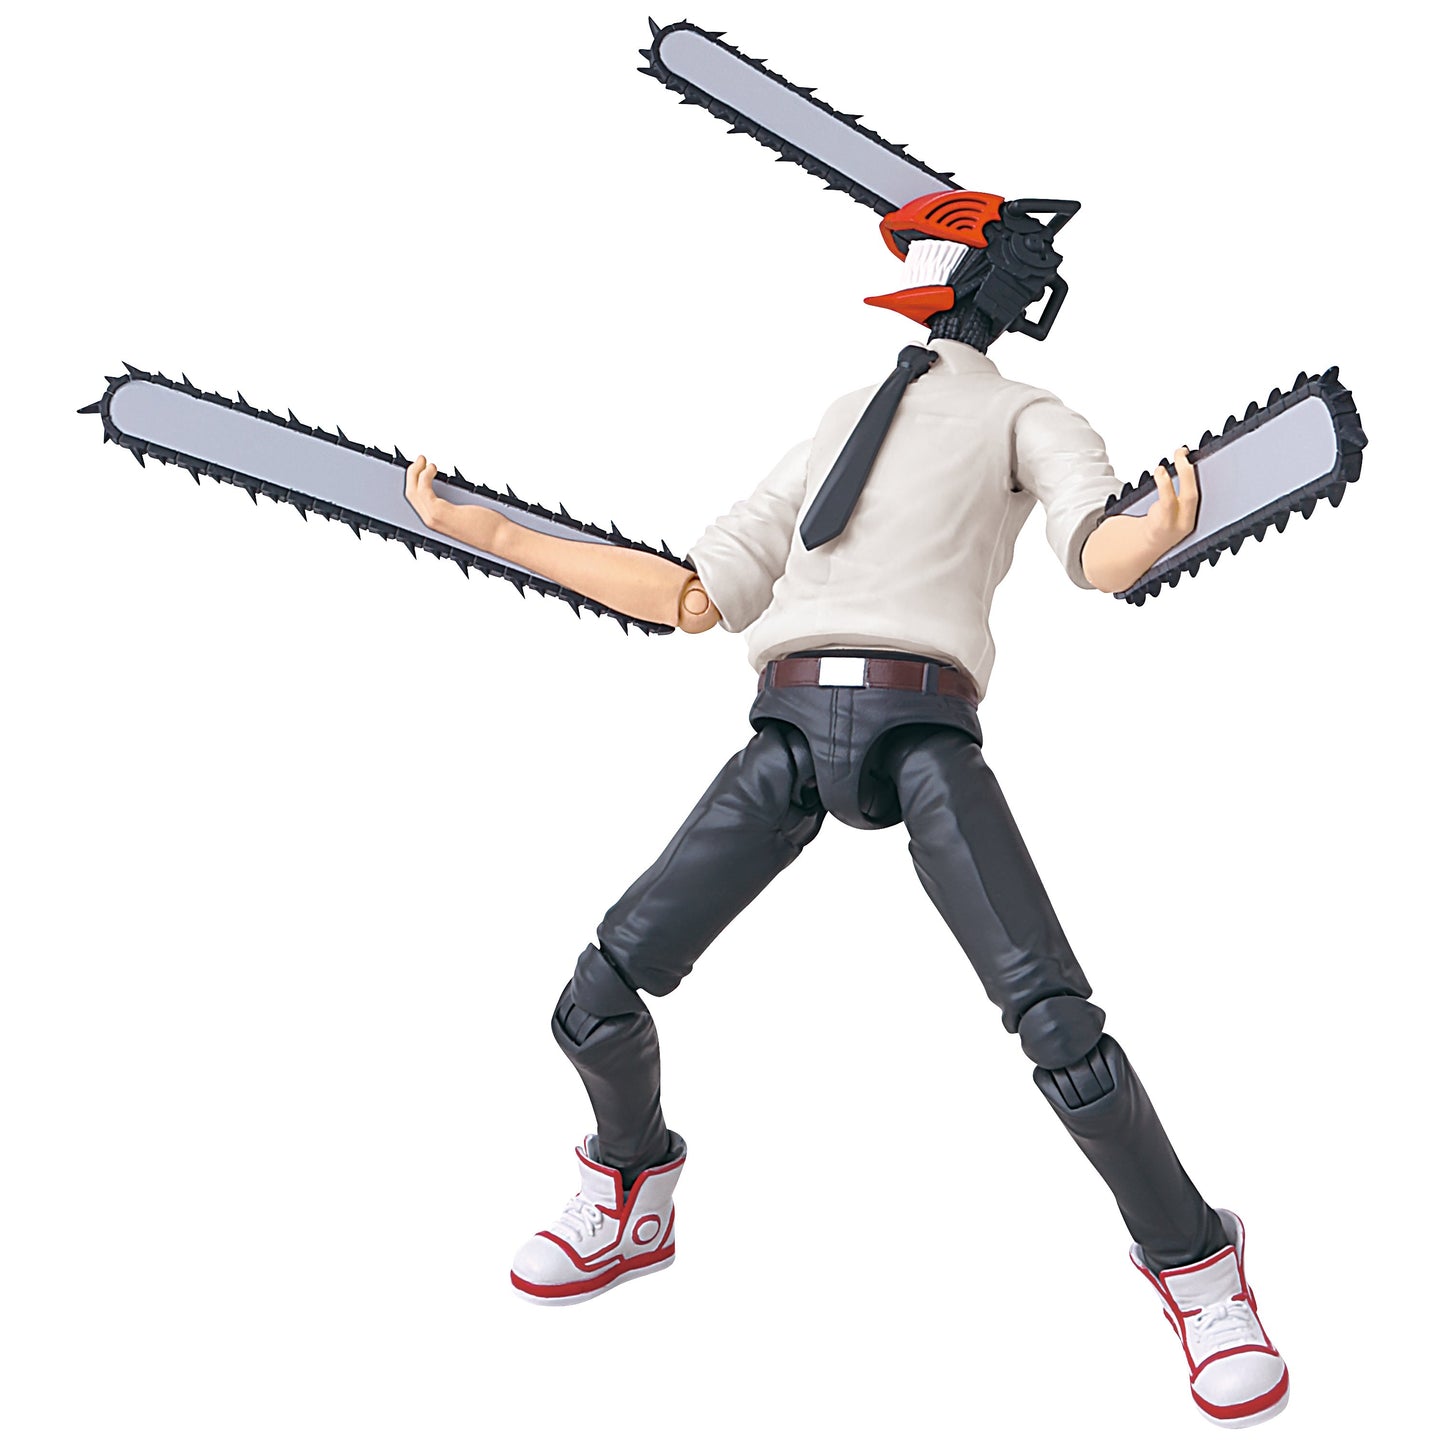 Chainsaw Man: Anime Heroes - Chainsaw Man Action Figure